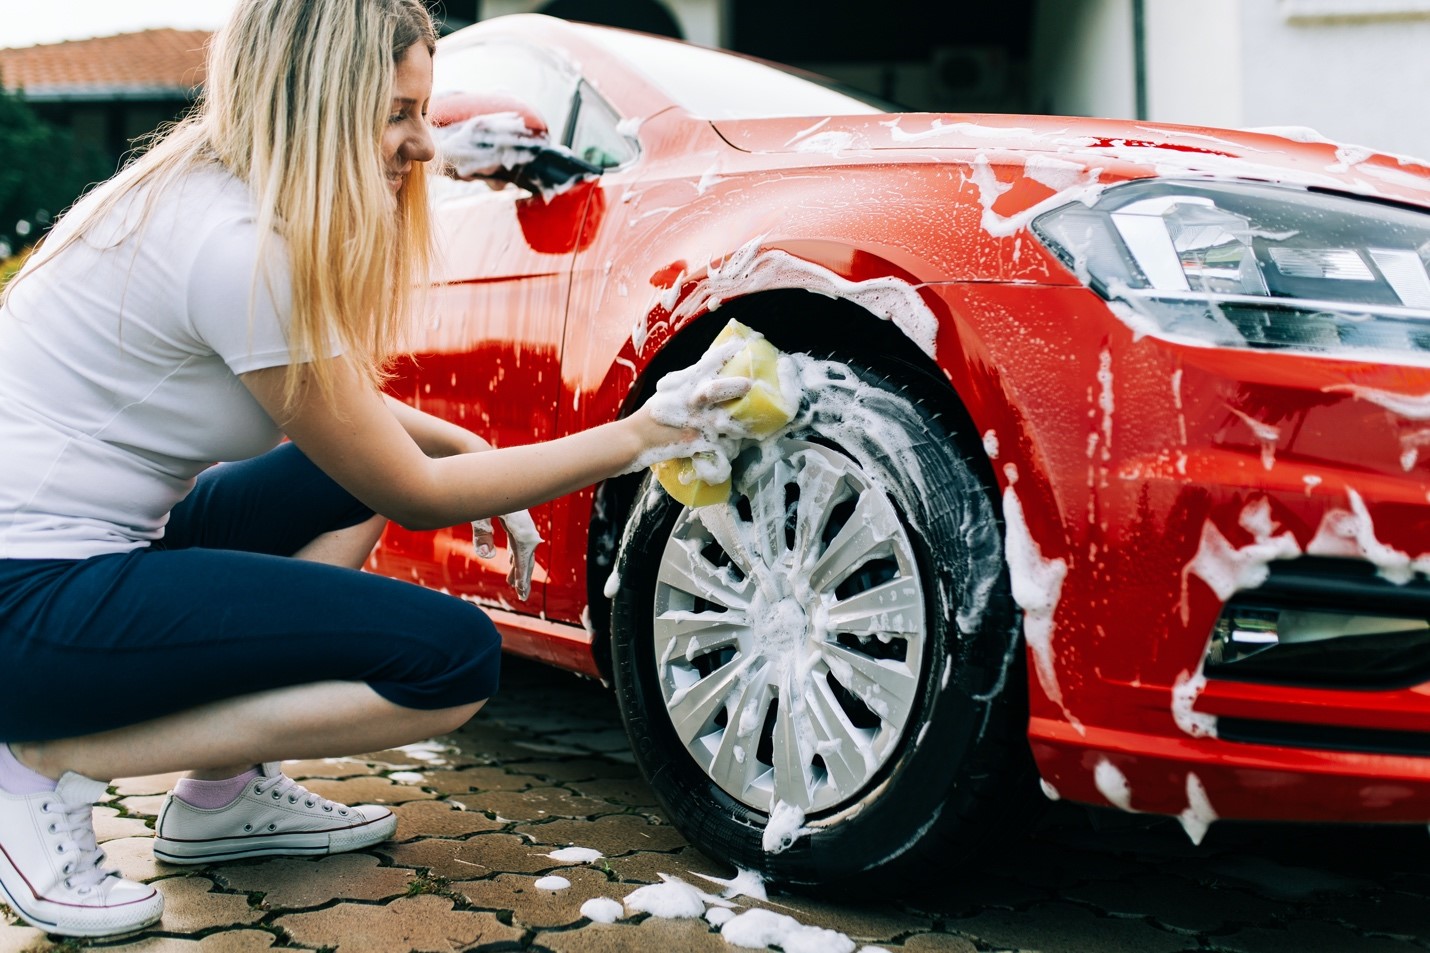 Auto carpet cleaning best practices - Professional Carwashing & Detailing